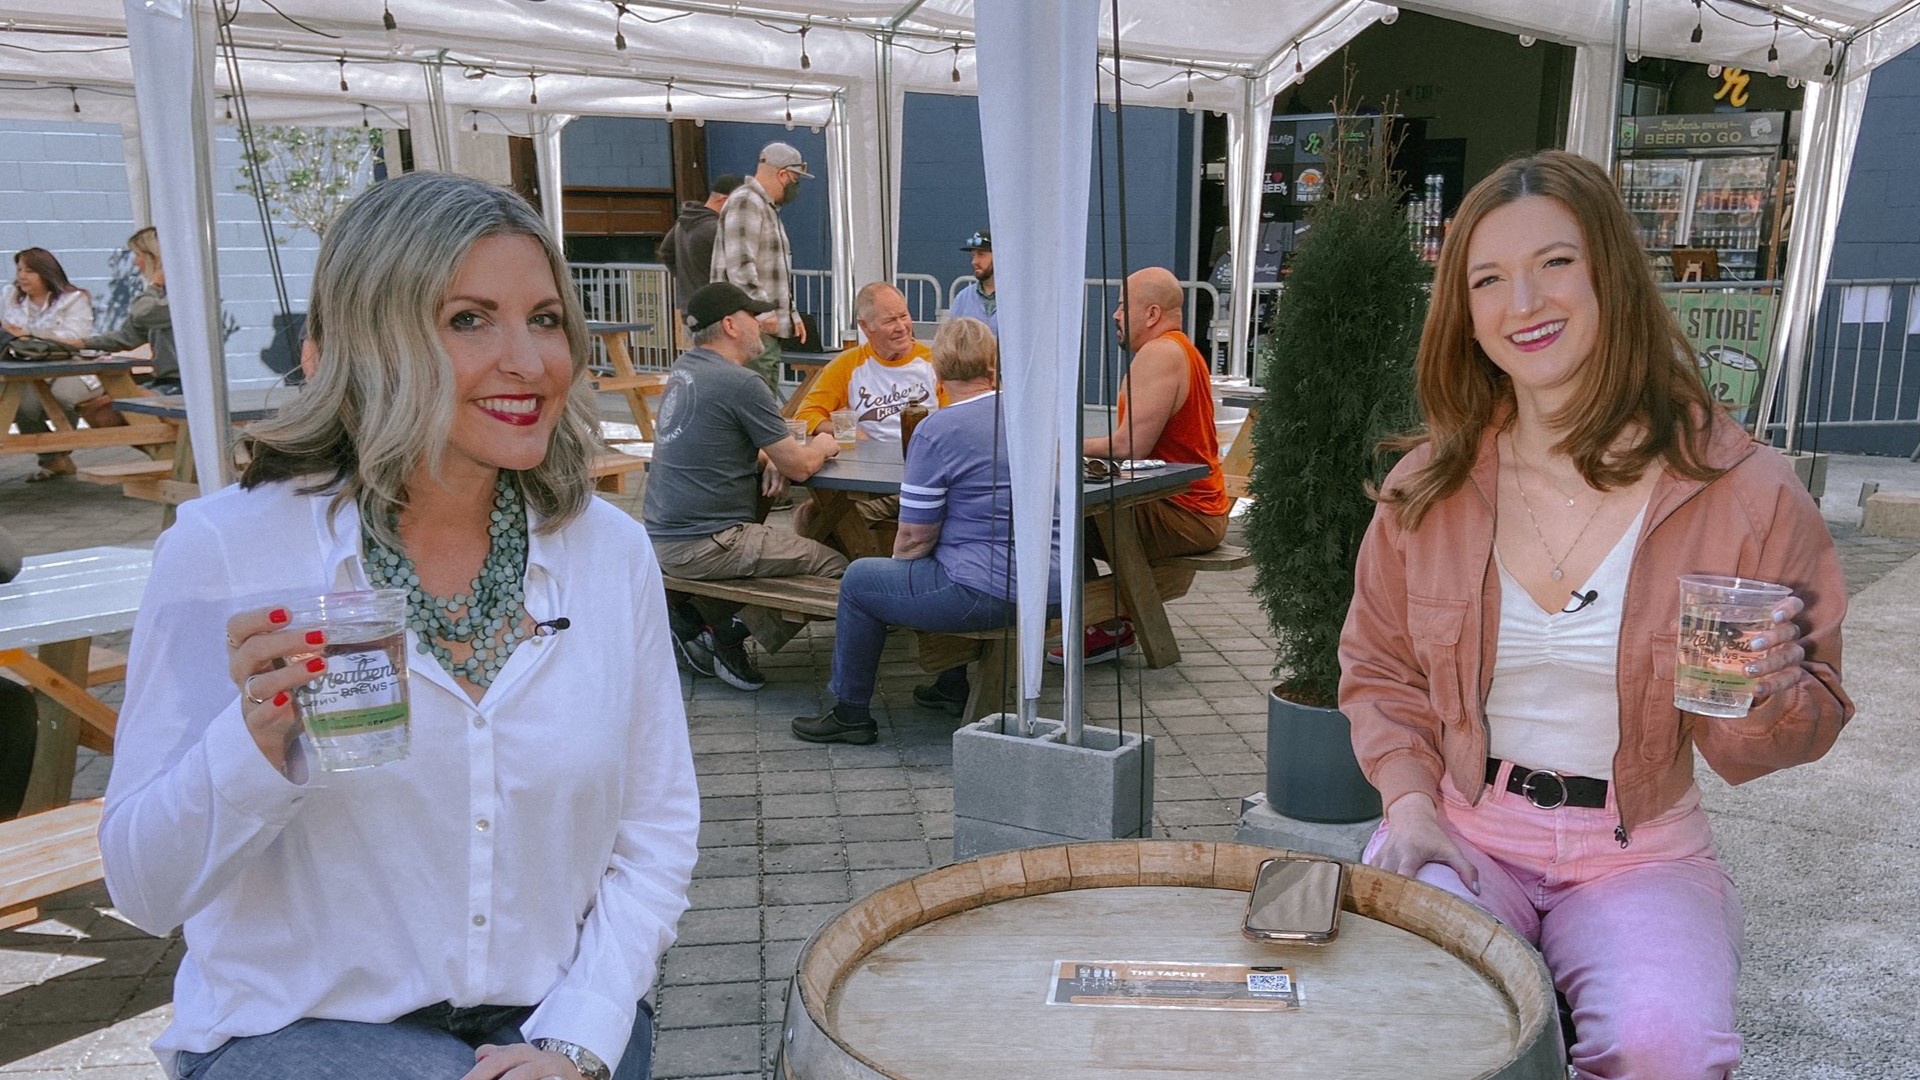 The family-owned brewery just debuted a new 3,000 square foot patio in Ballard! 🍻 #k5evening